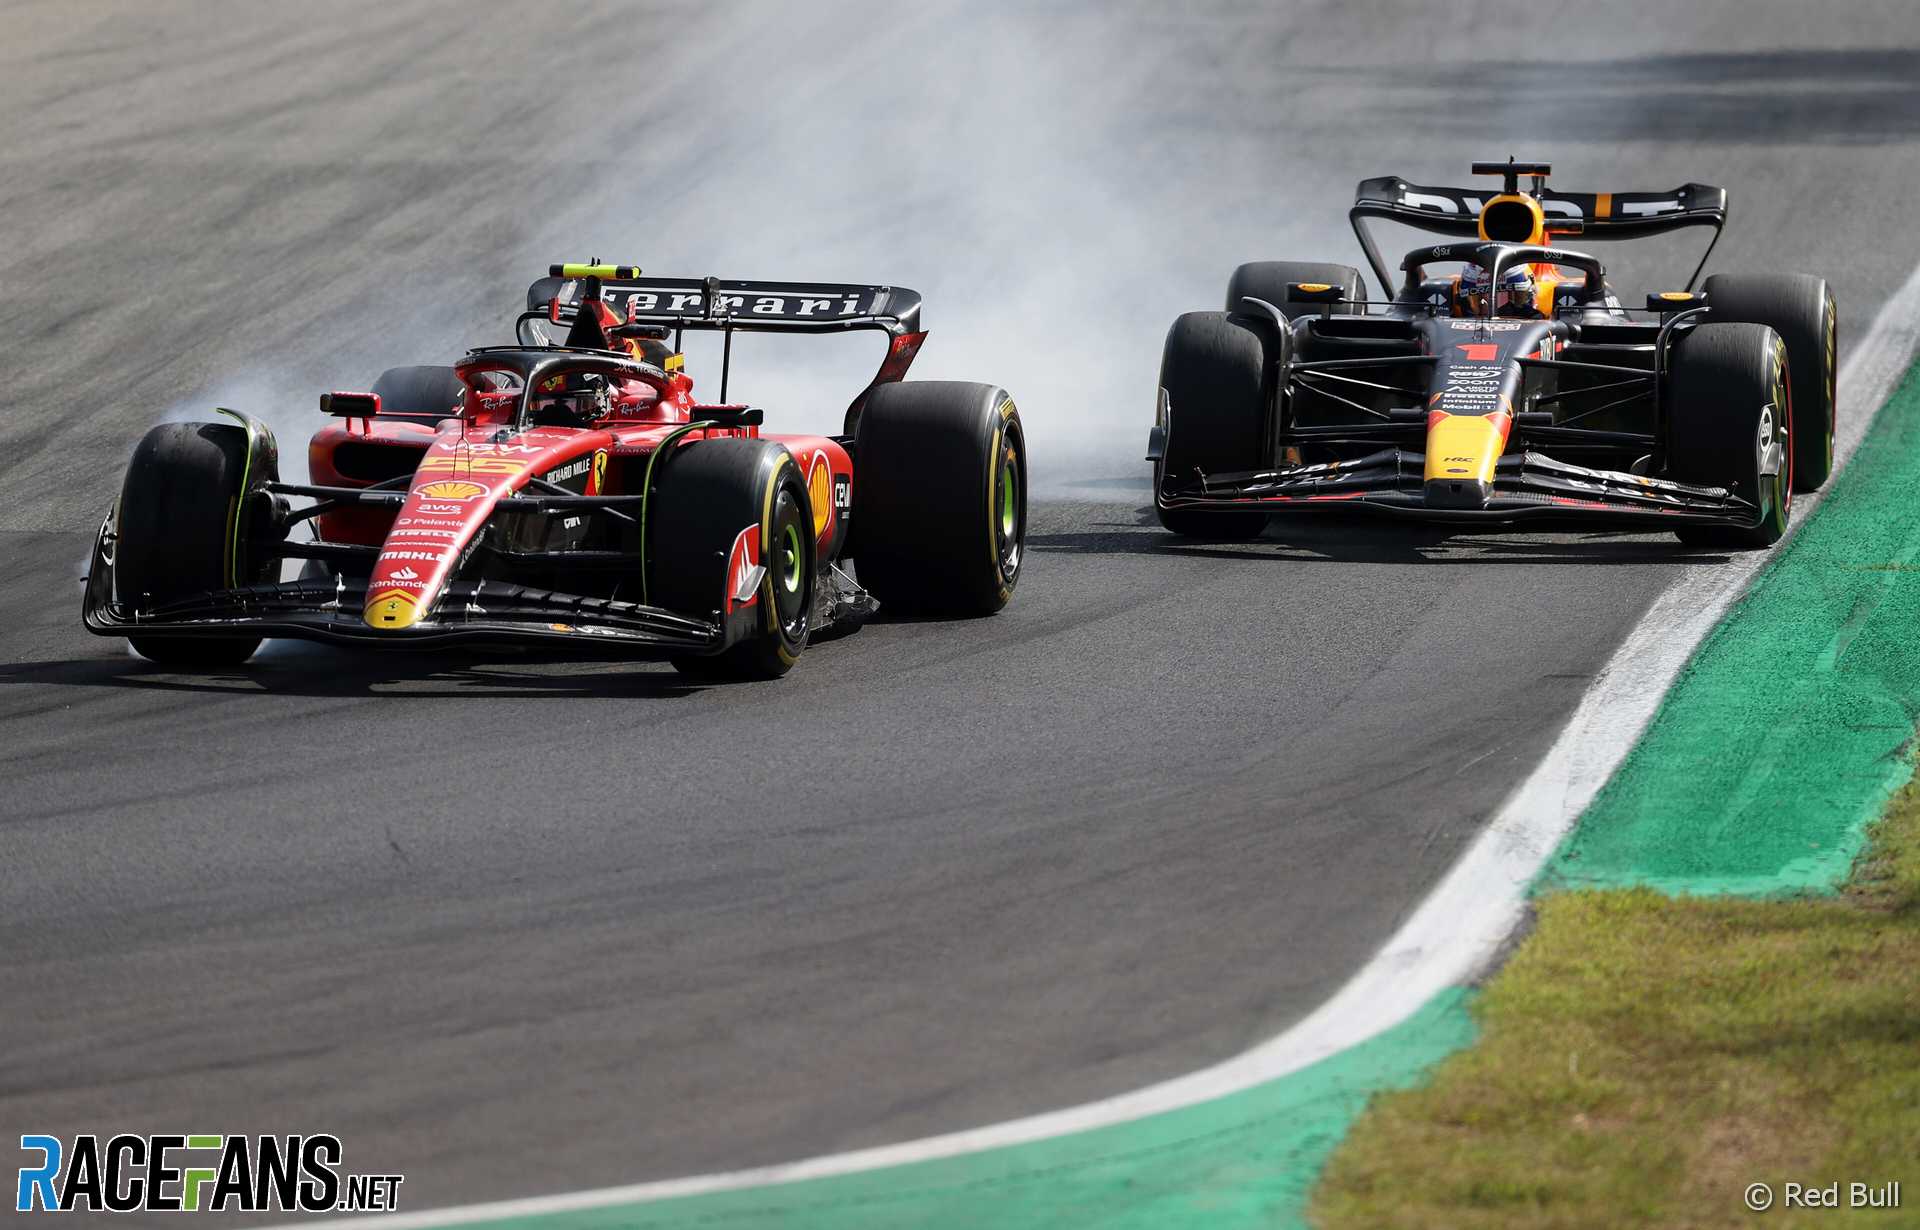 Verstappen continues his decimation of Formula 1 by piercing